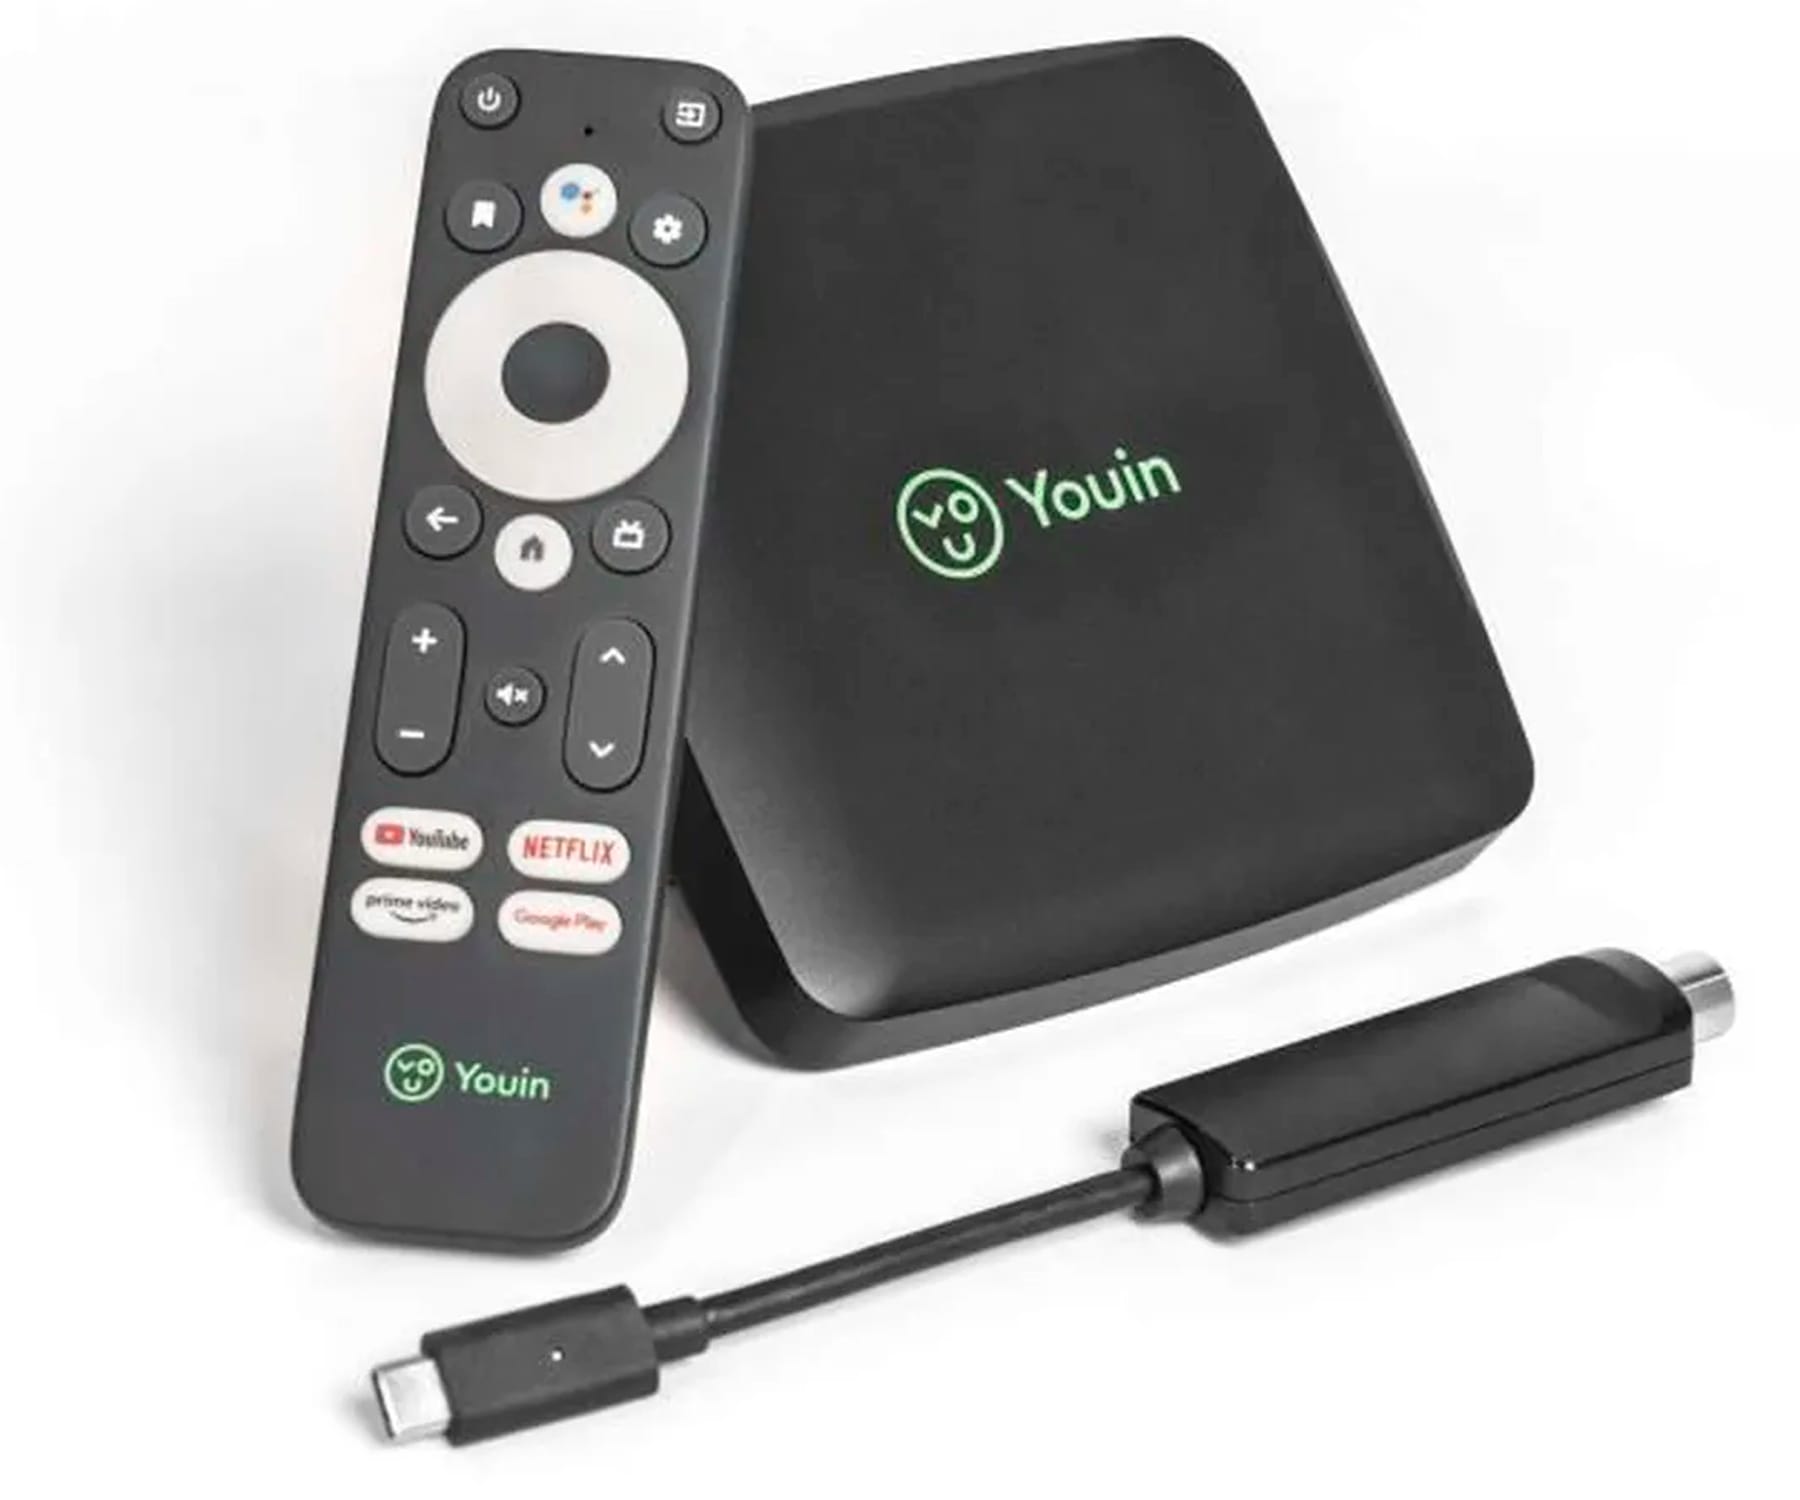 YOUIN YOU-BOX 4K / SMART TV BOX ANDROID TV CON TDT